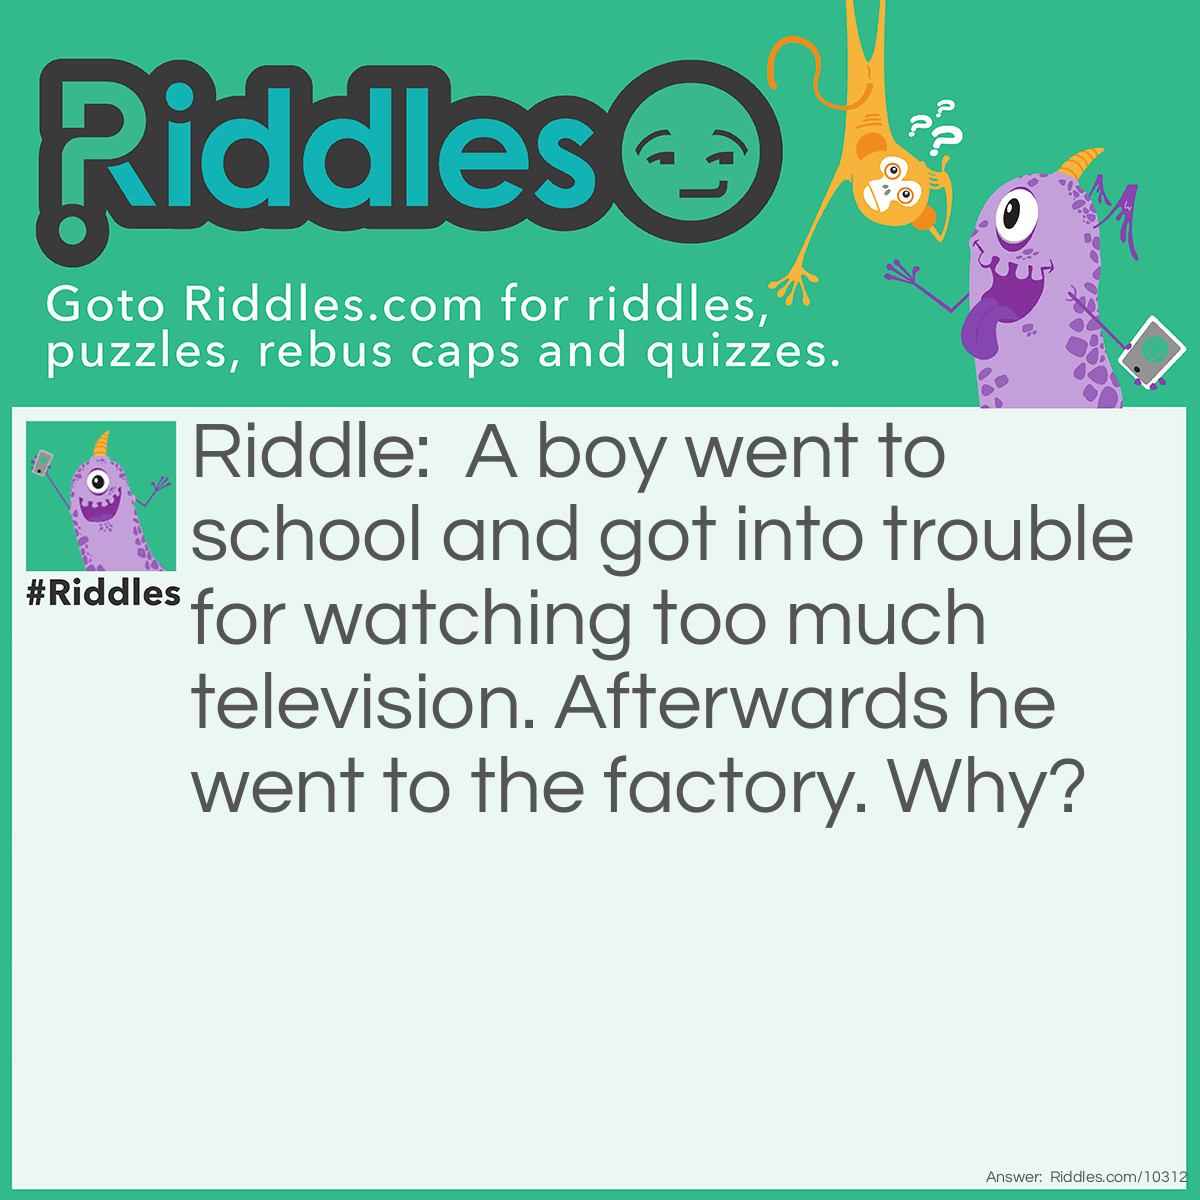 Riddle: A boy went to school and got into trouble for watching too much television. Afterwards he went to the factory. Why? Answer: To learn some real facts!